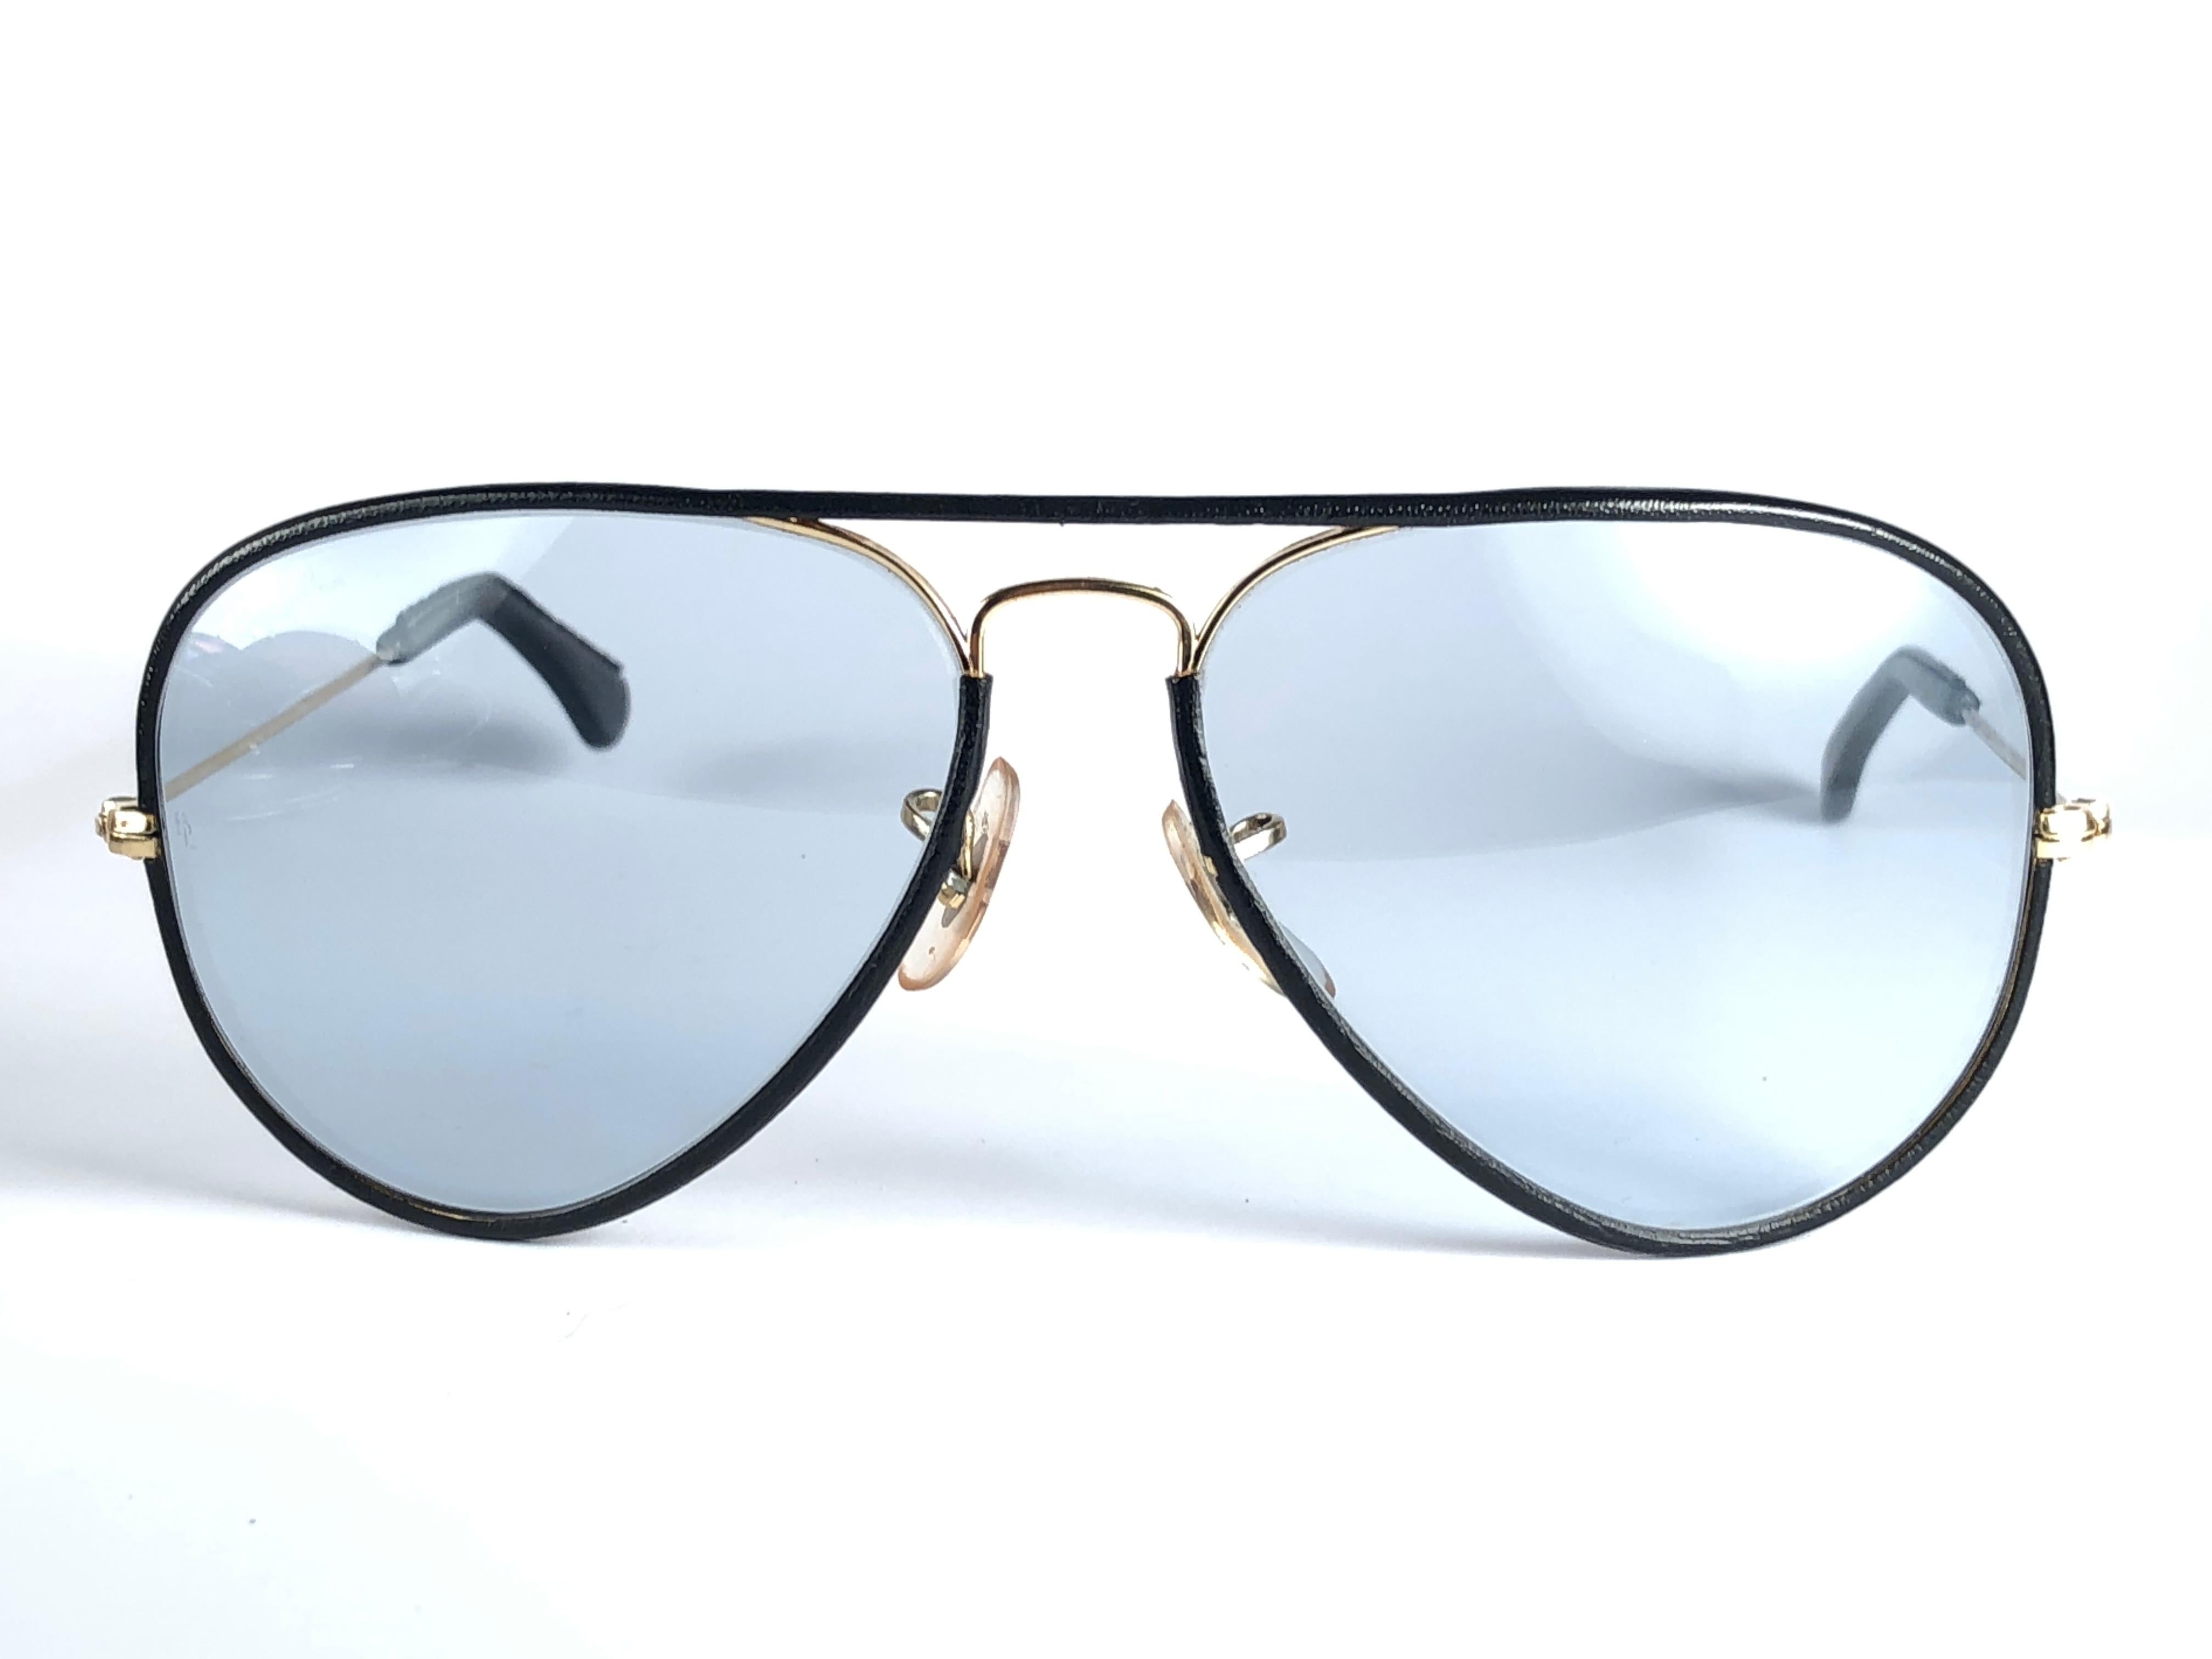 New Vintage Ray Ban Leathers Aviator 58mm in black leather with gold metal combination frame sporting blue changeable lenses.

Comes with its original Ray Ban B&L case. This pair may show minor sign of wear due to storage. 
Rare and hard to find.